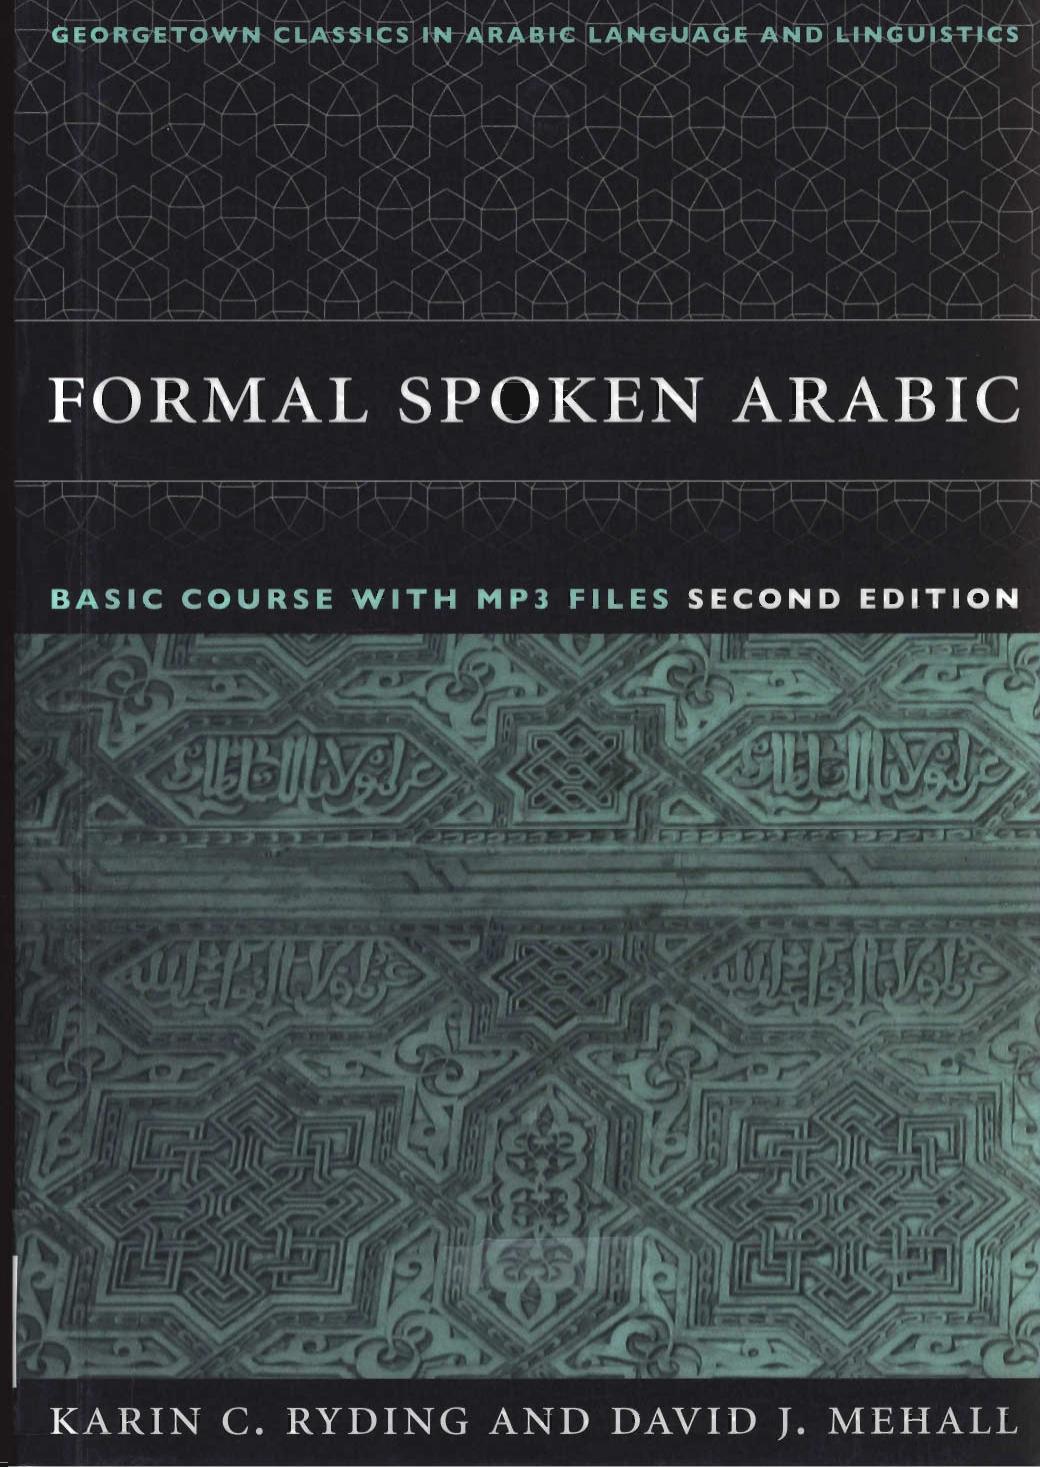 Formal Spoken Arabic Basic Course (Georgetown Classics in Arabic Language and Linguistics) ( PDFDrive )